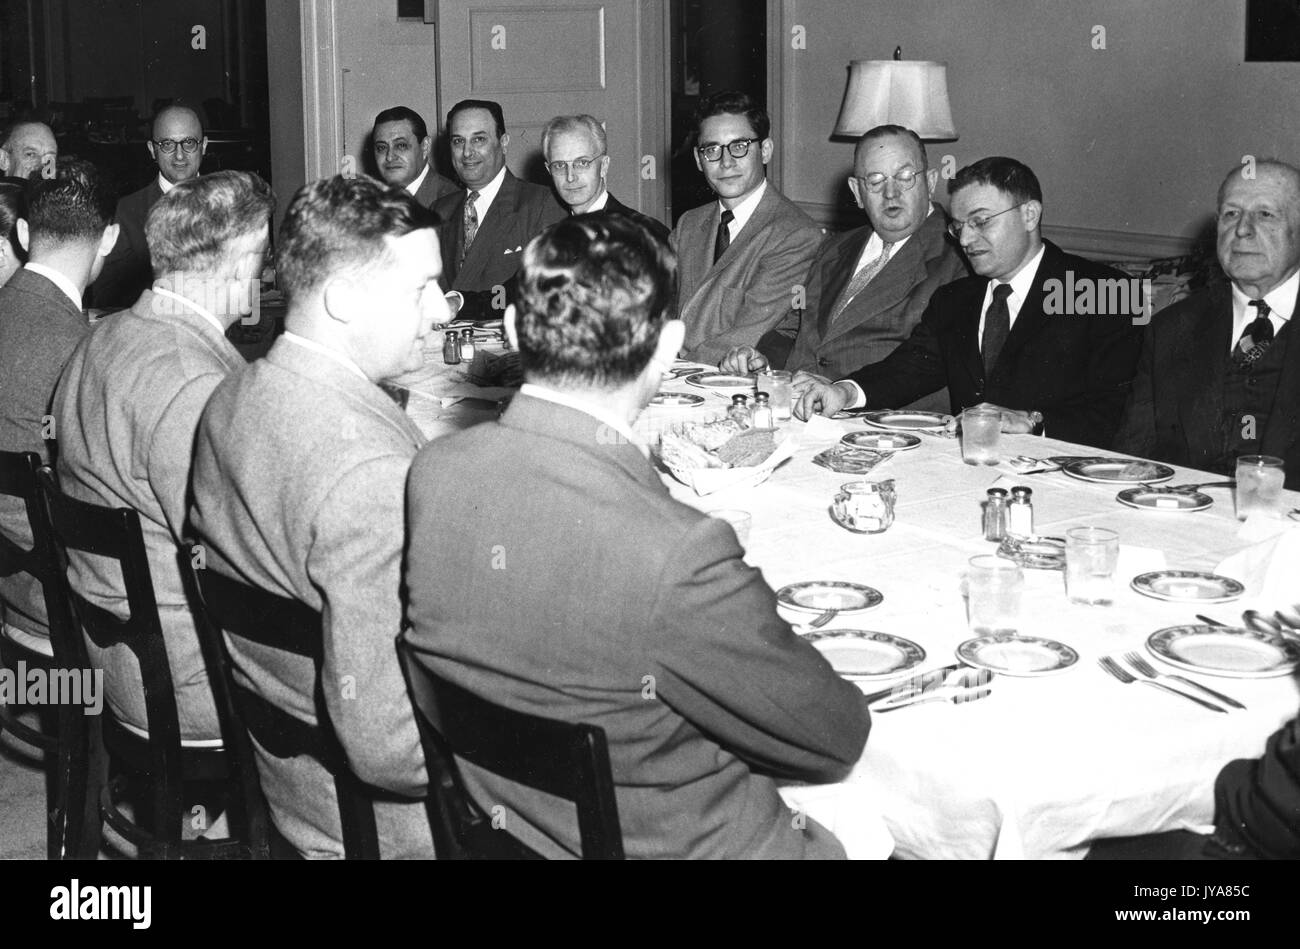 The WAAM television channel Public Service Committee is sitting at a long rectangular table, American television host Lynn Poole is sitting among them, the table is set for a meal and all of the men are in business suits, 1955. Stock Photo